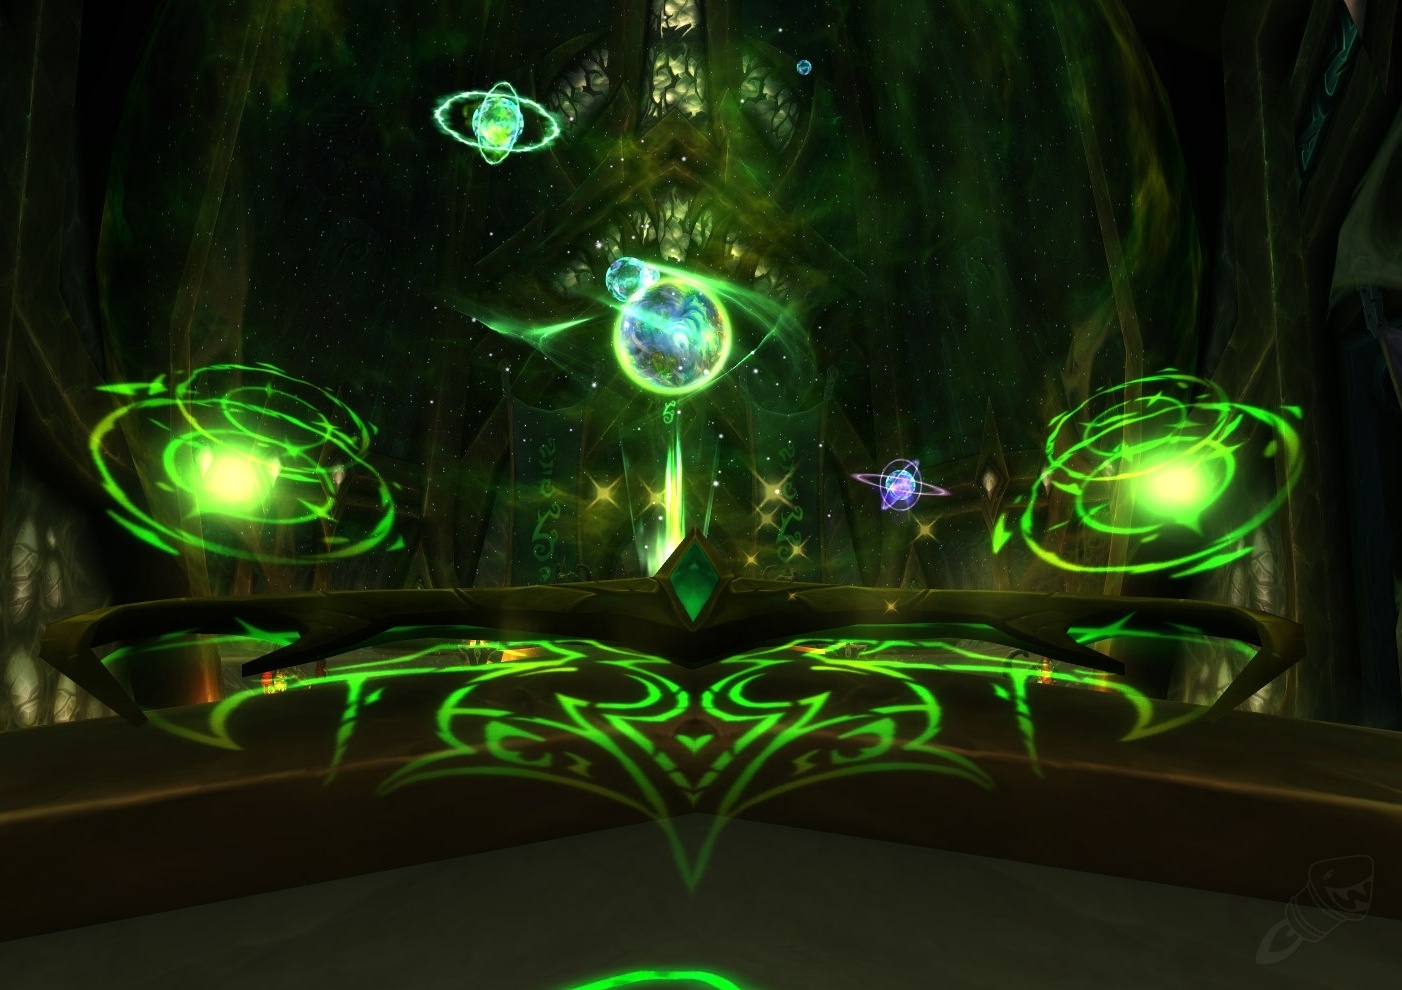 gaining spell power in wow ascension